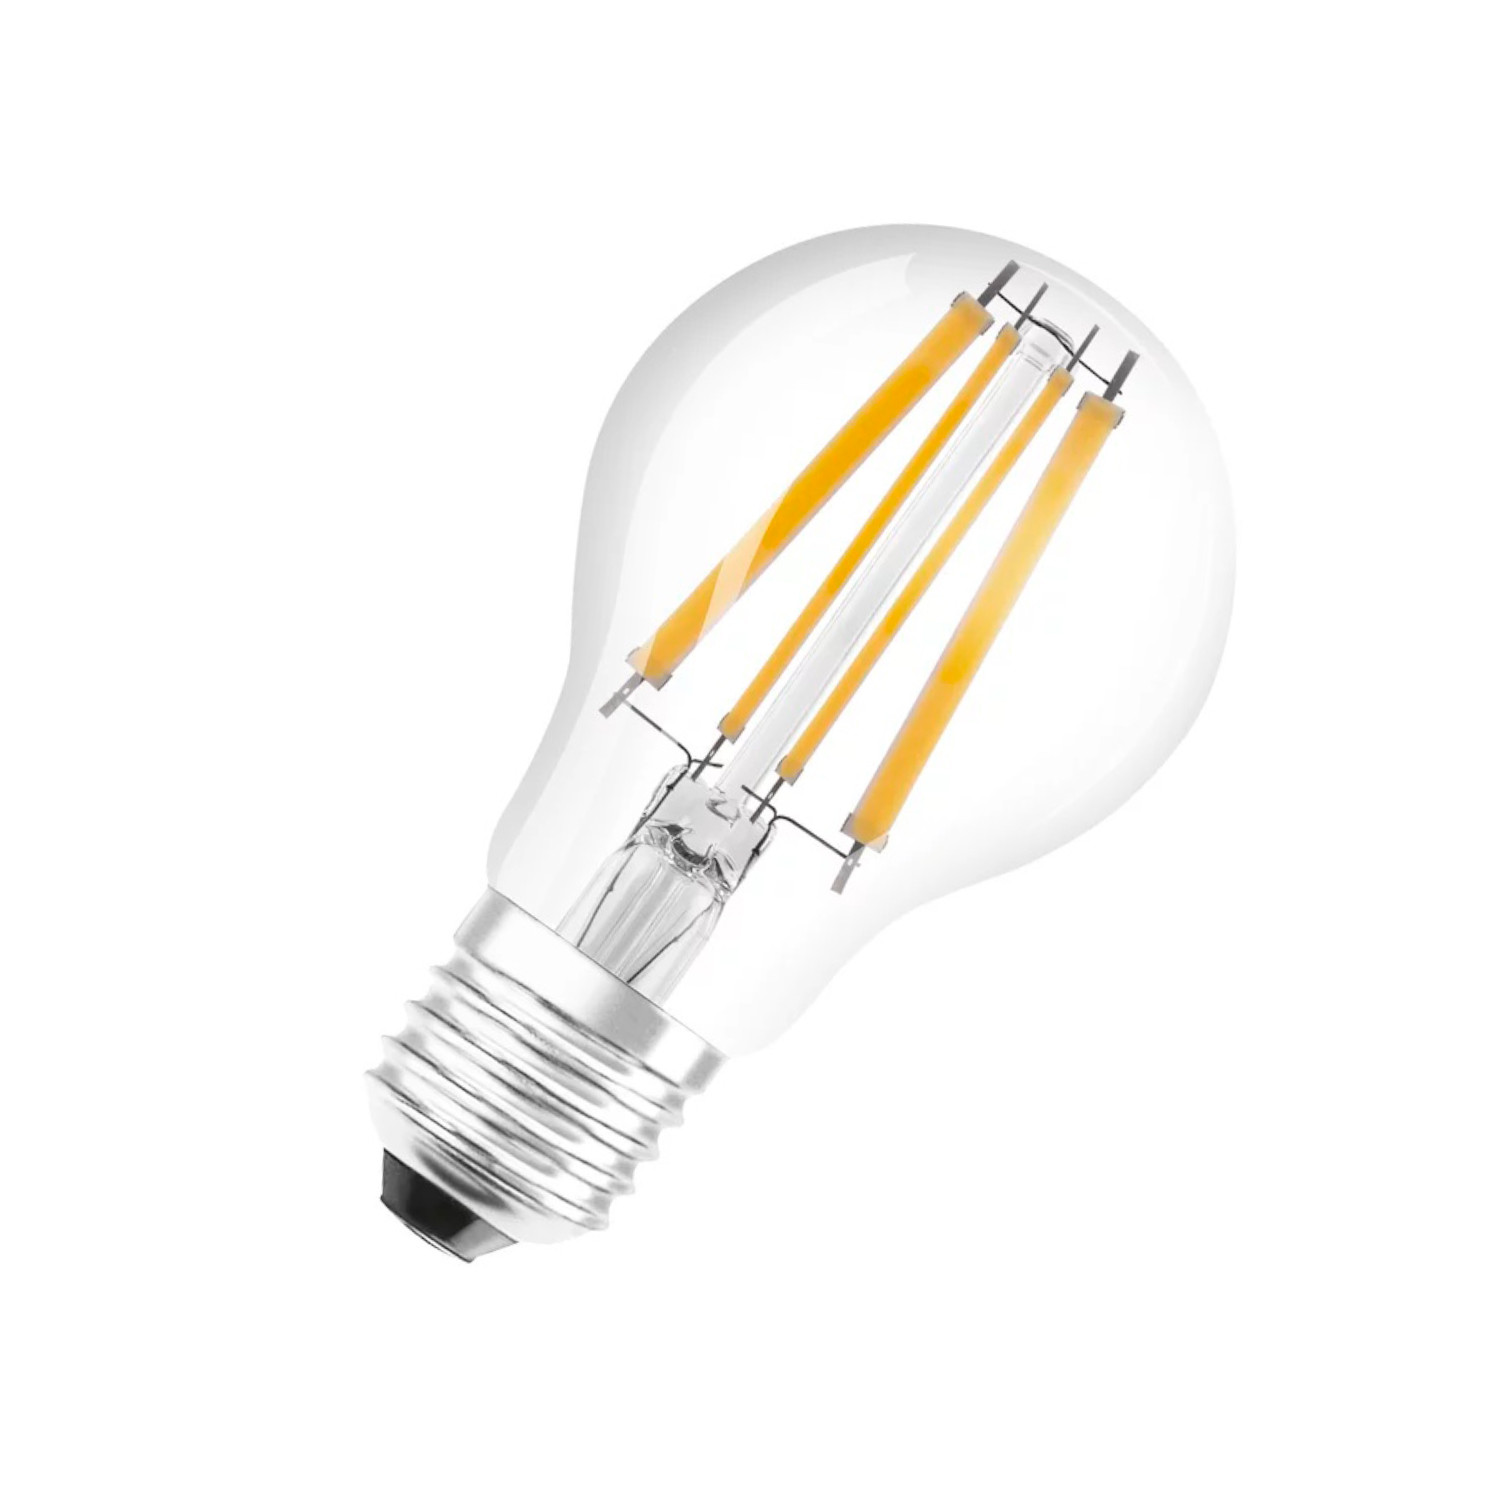 Are depressed Try out Competitive 11W E27 A60 1521 lm Parathom Classic Dimmable Filament LED Bulb OSRAM  4058075755581 - Ledkia